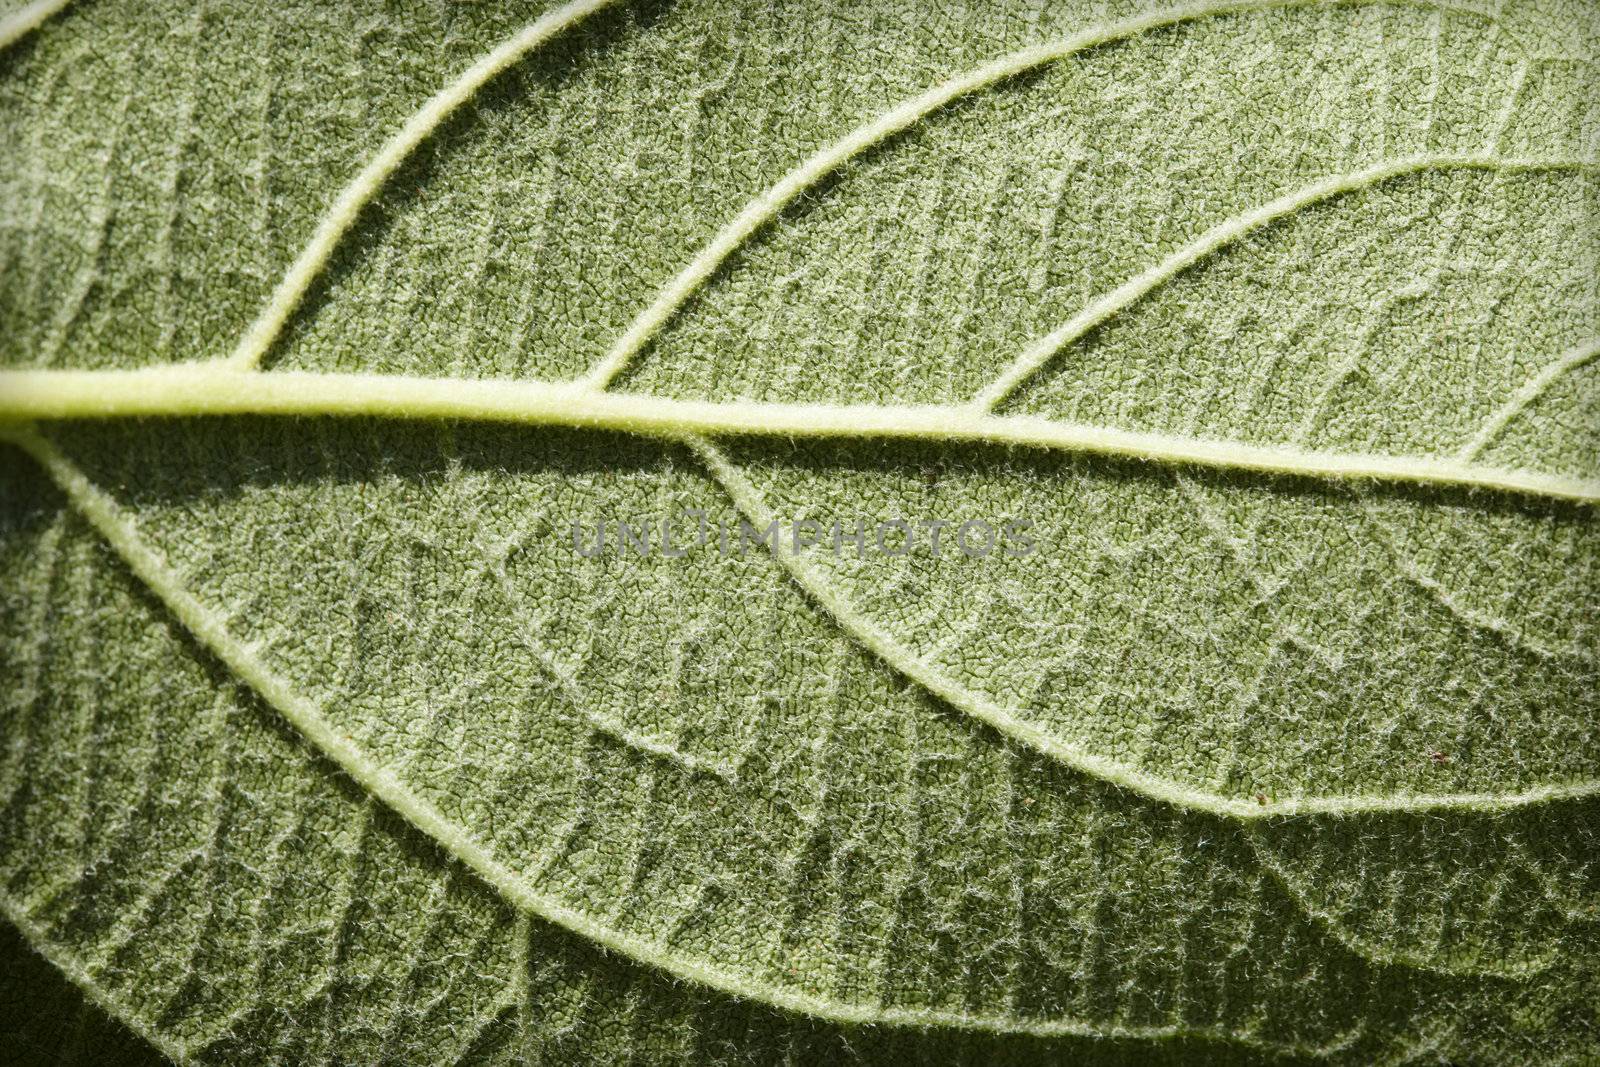 Green leaf plants with veins close up